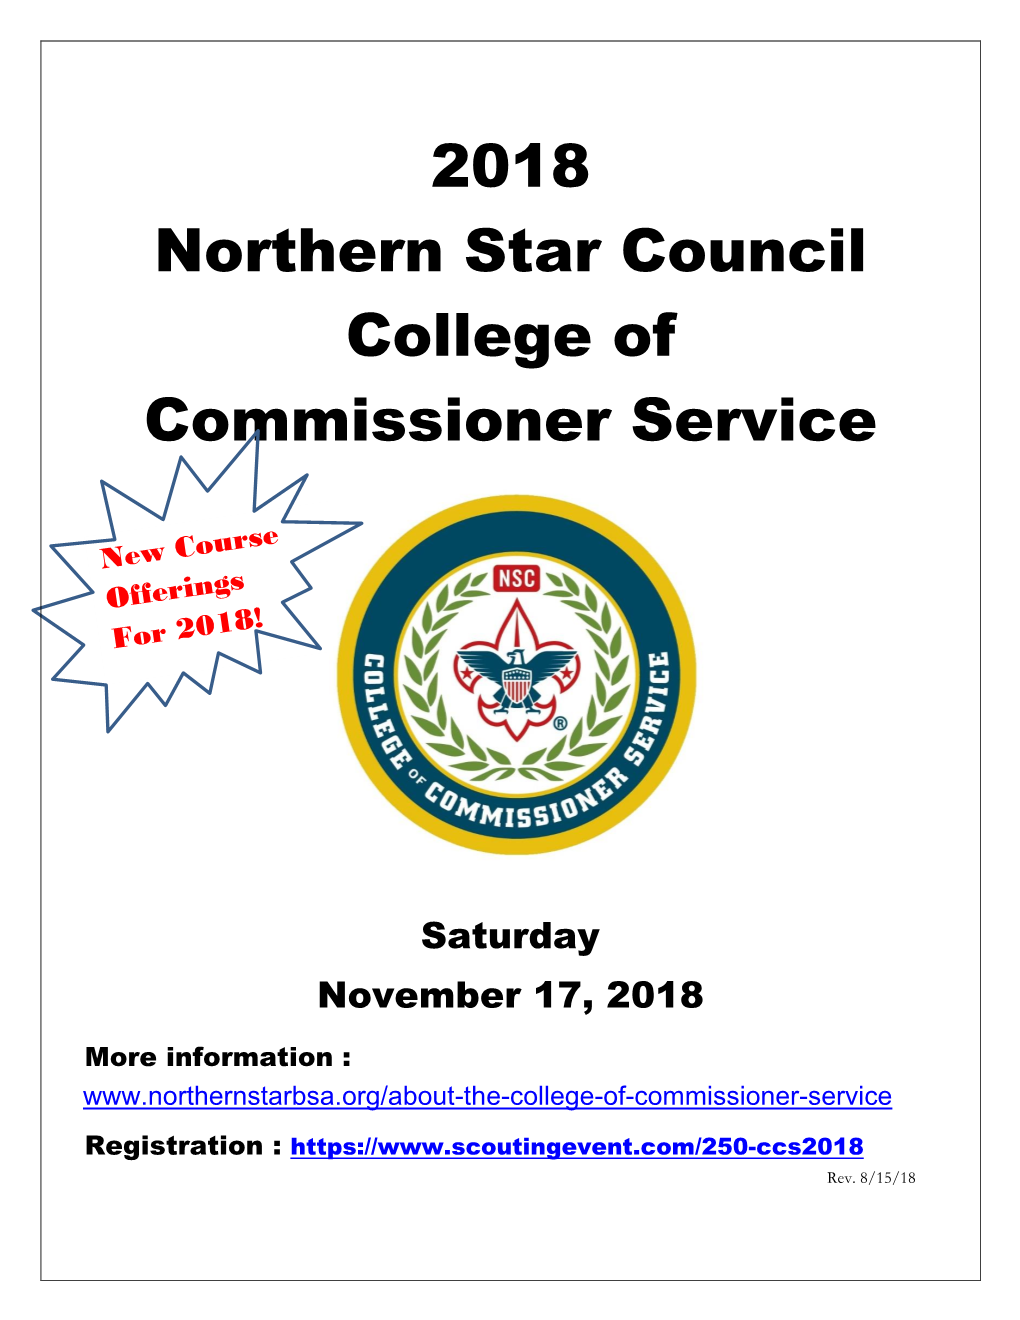 2018 Northern Star Council College of Commissioner Service